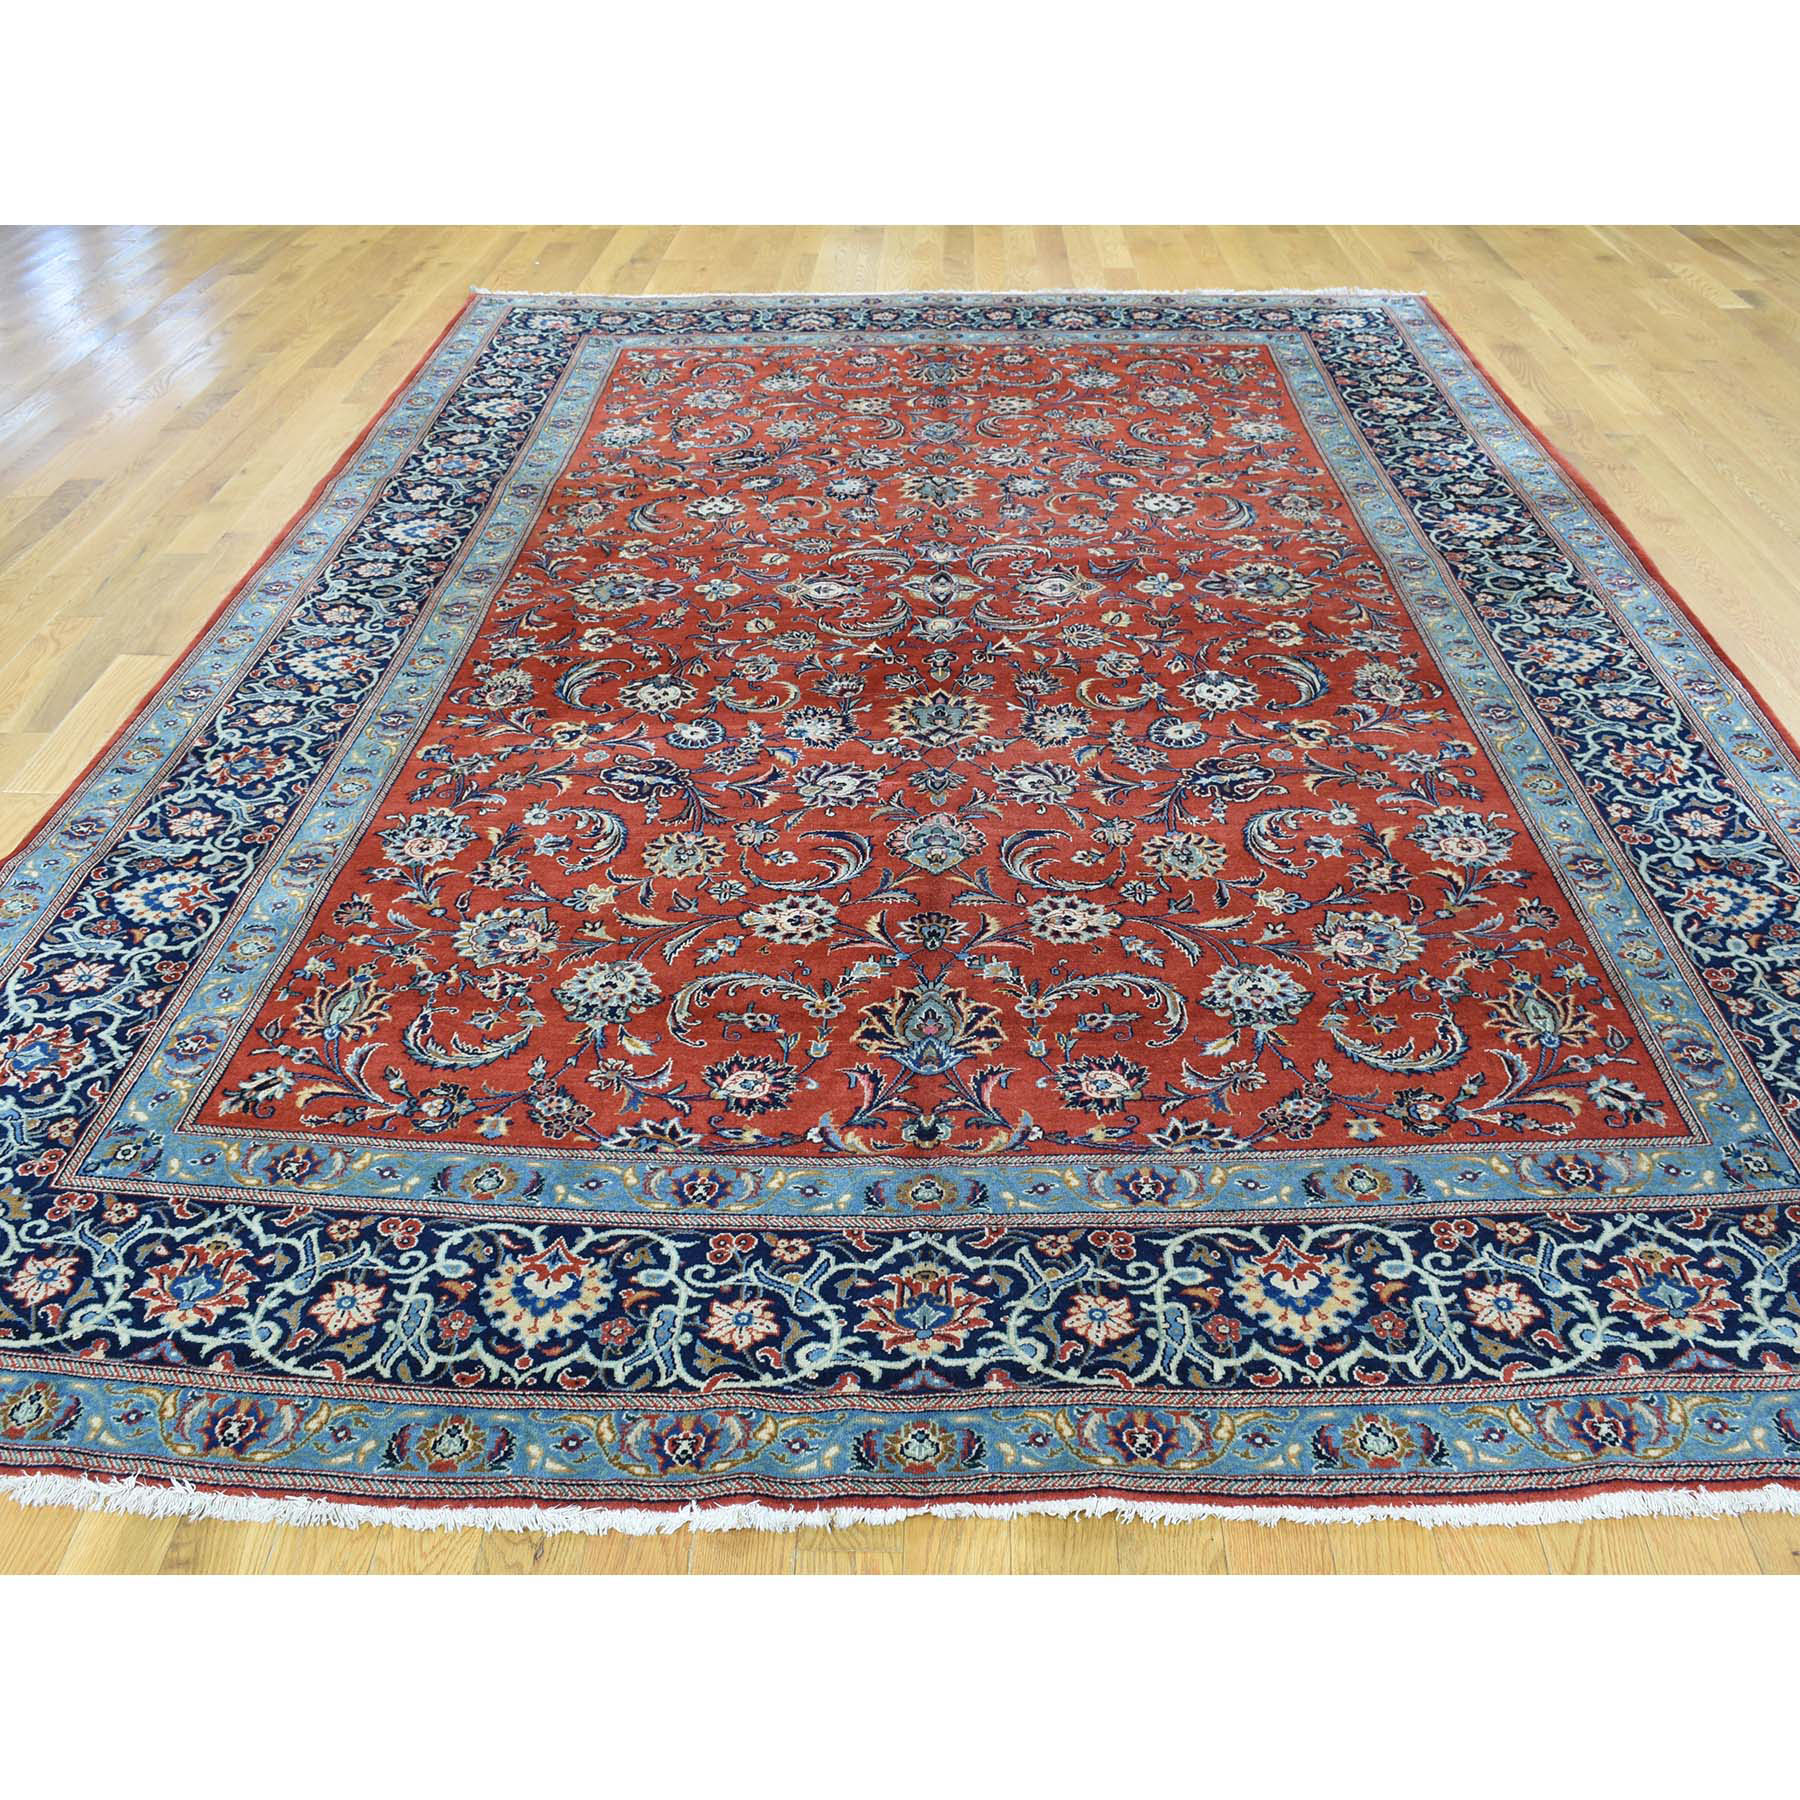 7-10 x11- Hand-Knotted Antique Persian Kashan Full Pile Oriental Rug 